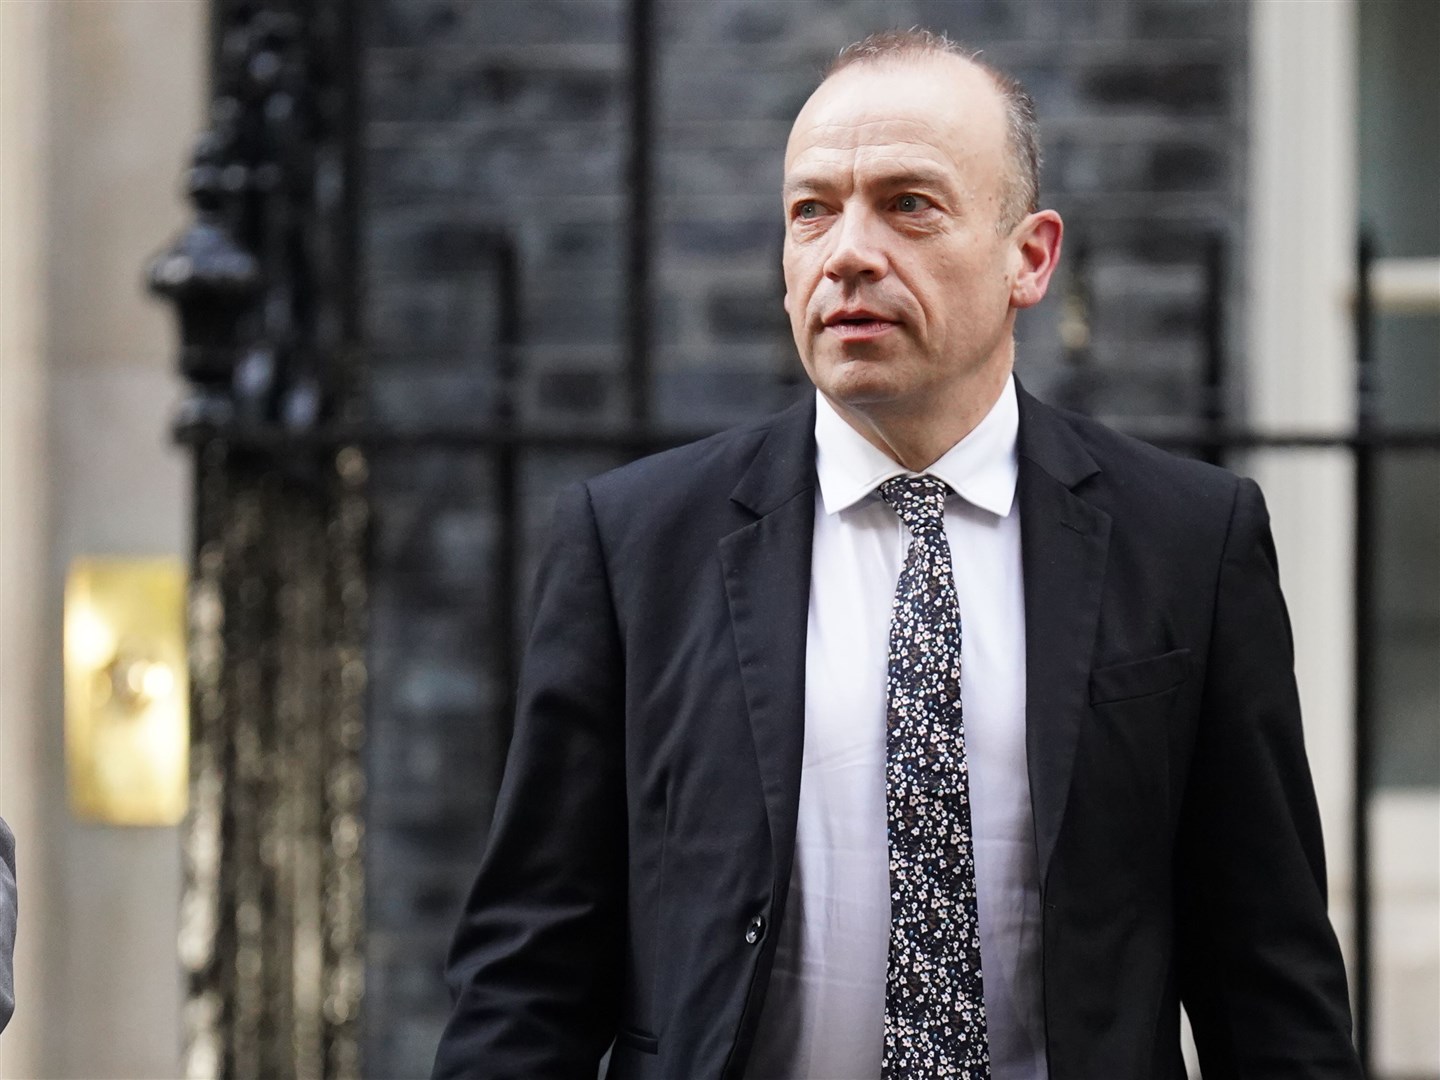 Northern Ireland Secretary Chris Heaton-Harris set the budget for Northern Ireland in the absence of an Executive (James Manning/PA)